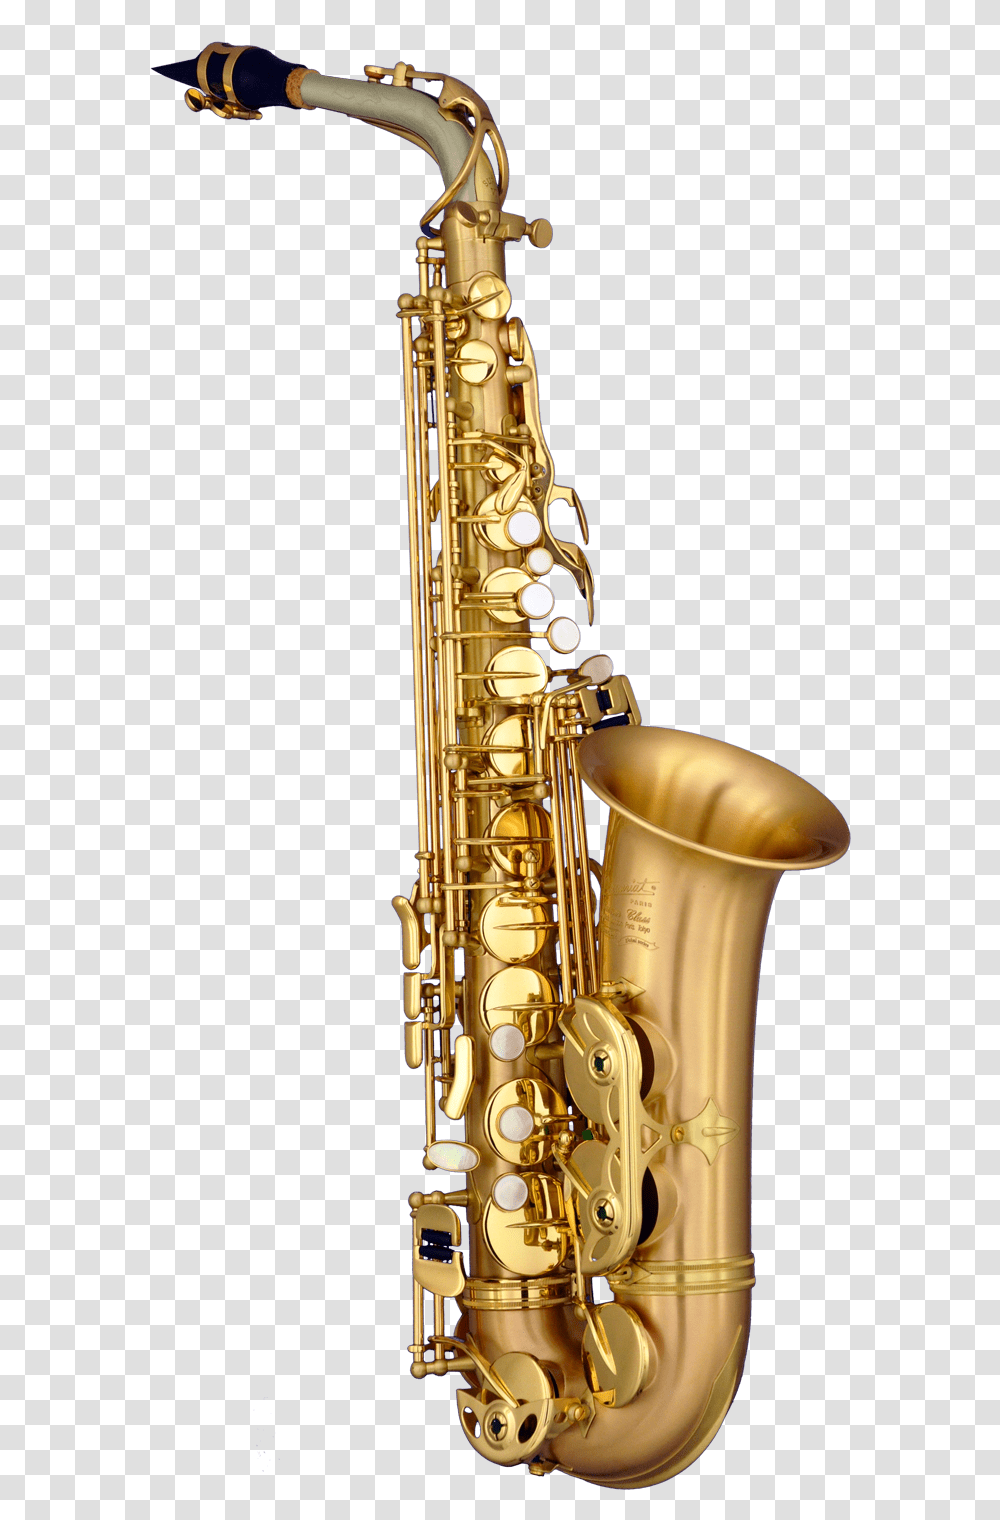 Trumpet Images Free Download Saxophone Saxophone Instrument, Leisure Activities, Musical Instrument, Brass Section Transparent Png